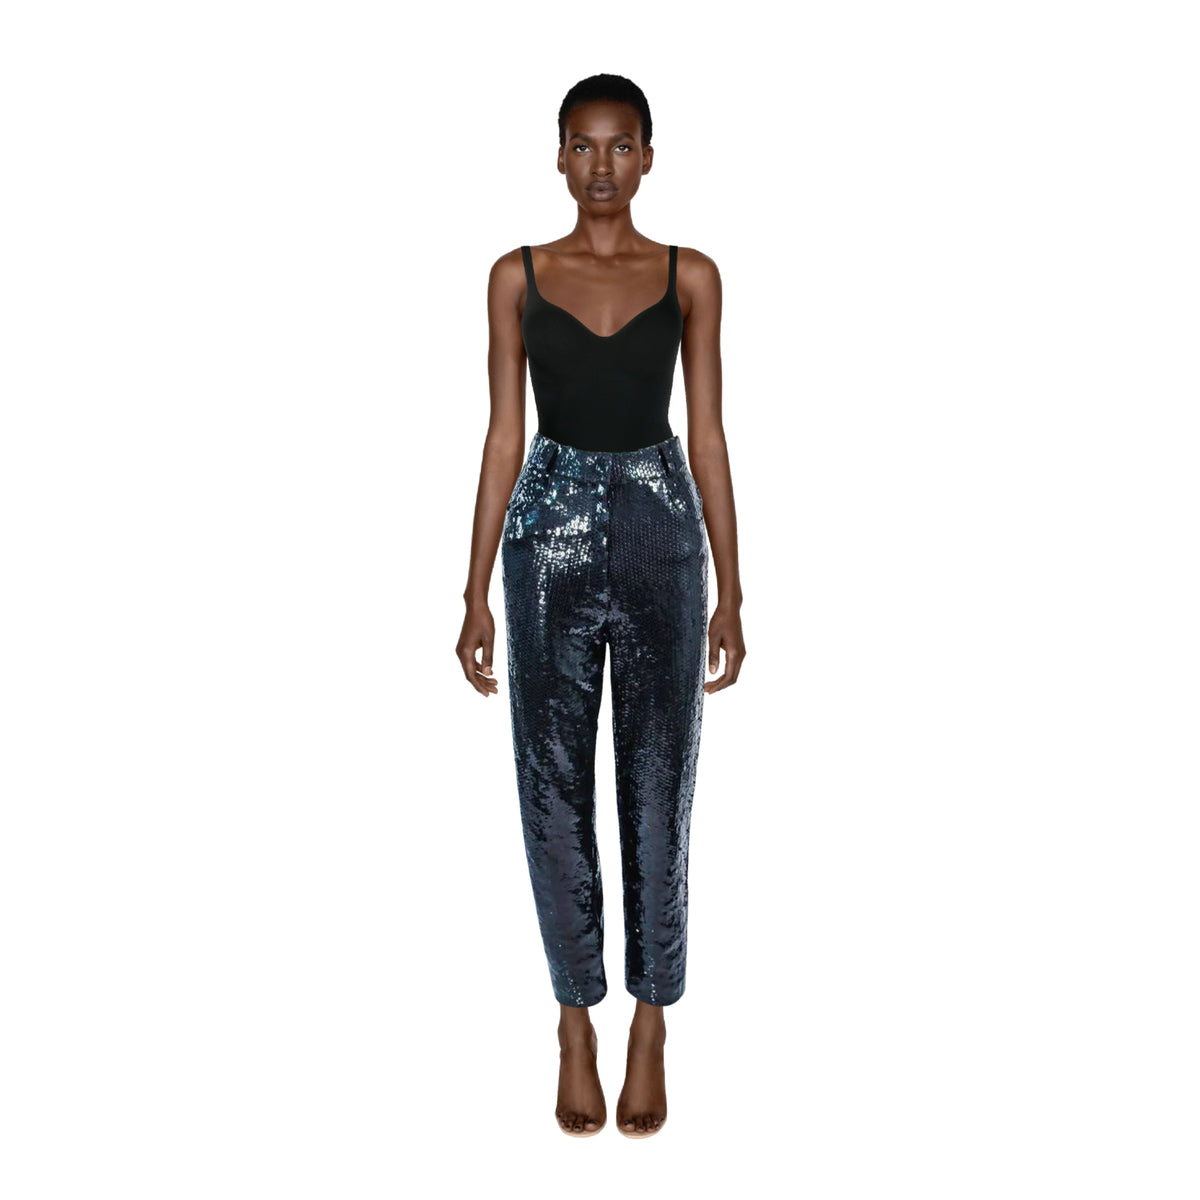 SUITE 101 Black High-Waisted Sequin Pants | Size US 8-10